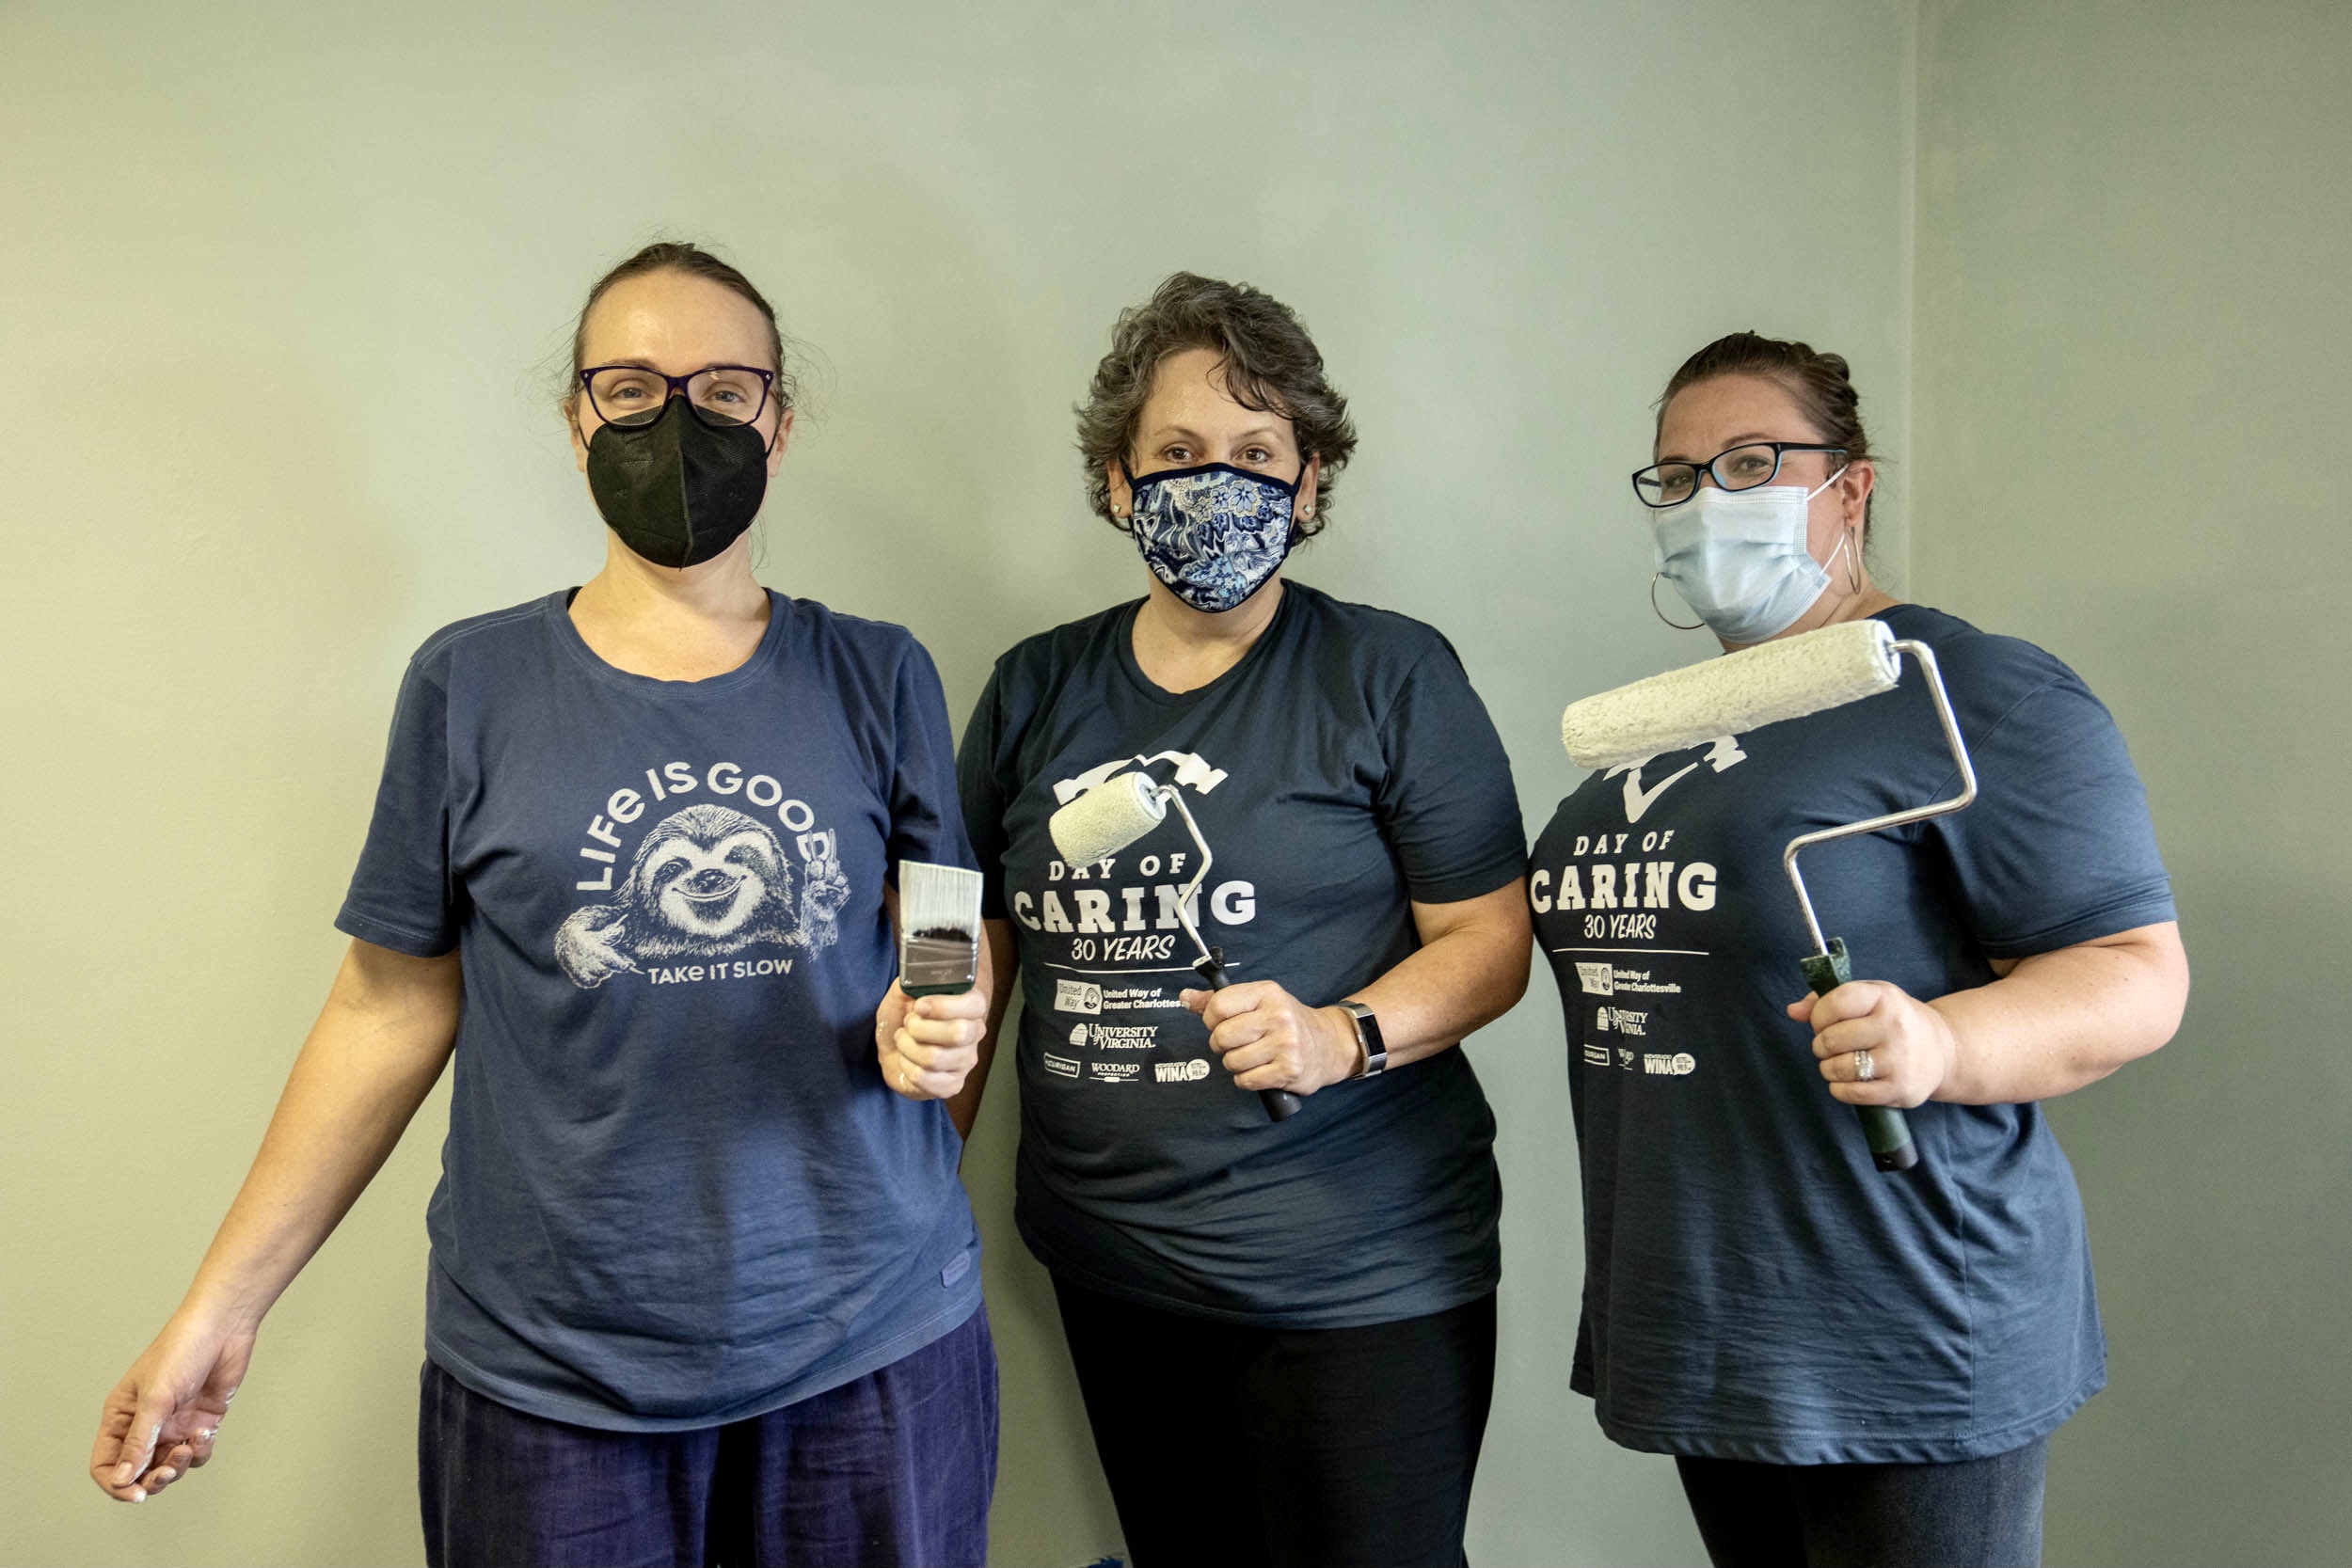 3 staff members from O'Neil Hall stand ready to paint at Piedmont CASA for Day of Caring on 9/22/21